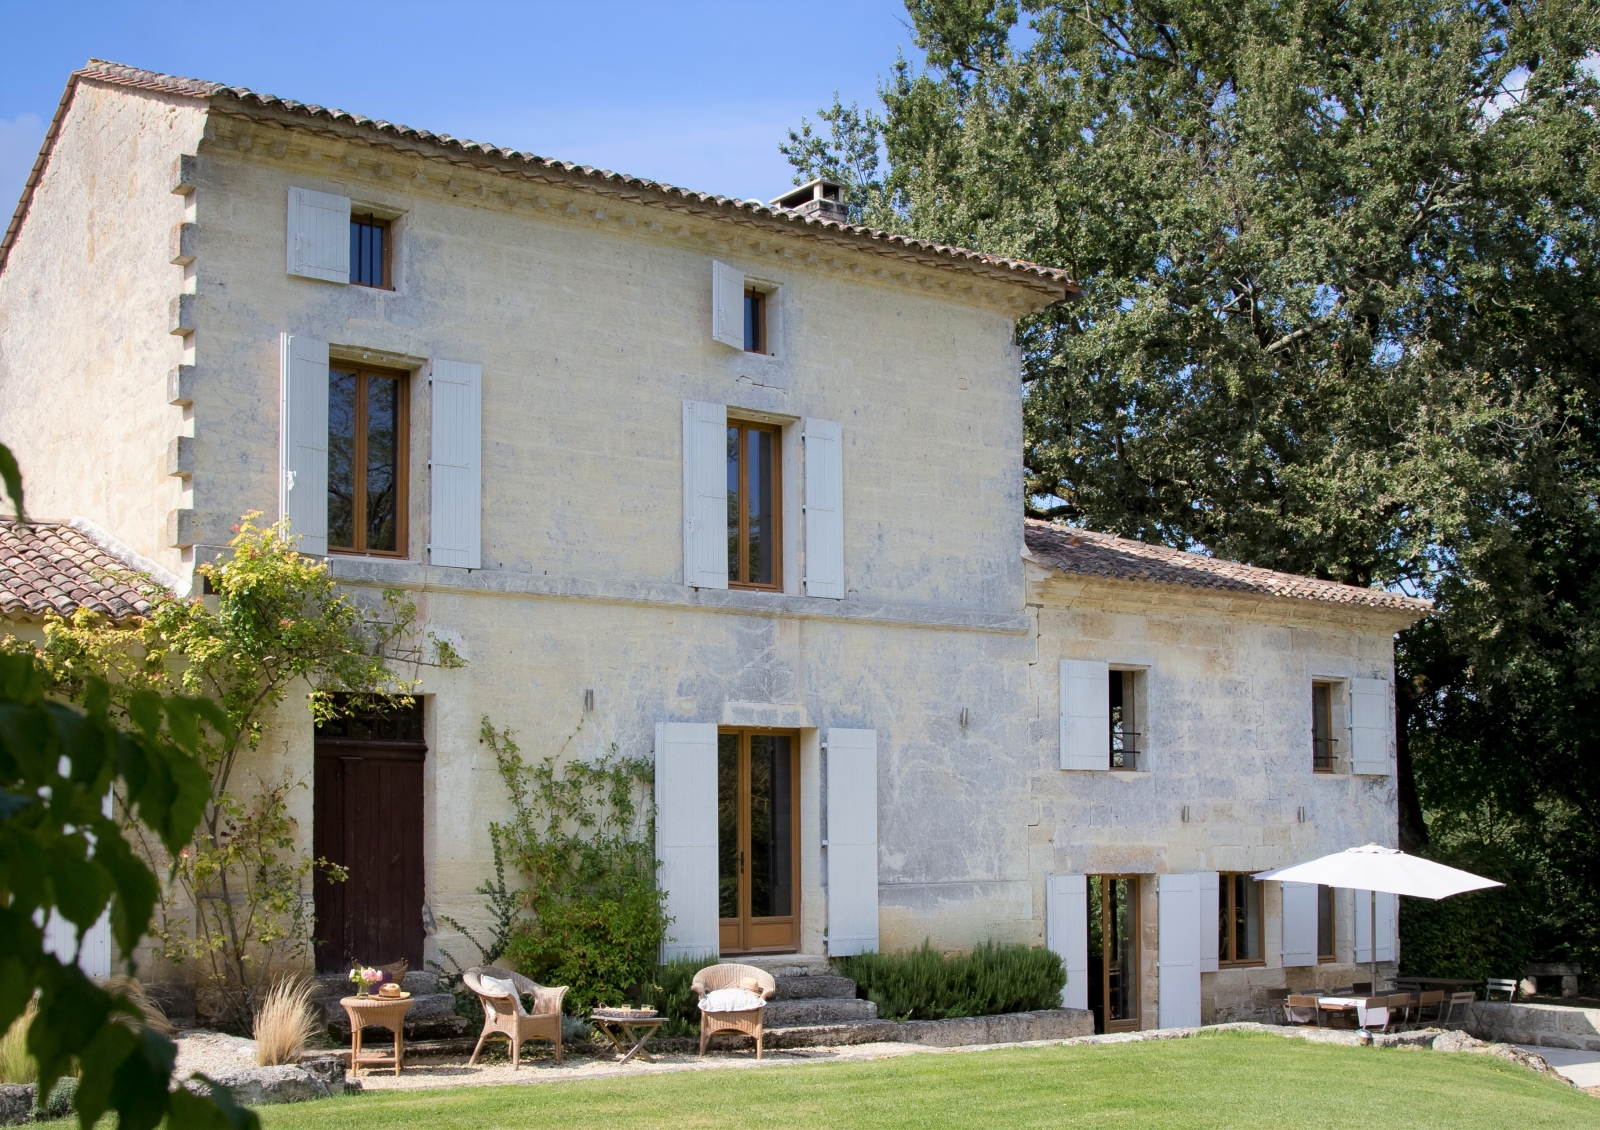 Façade and front garden with plants, coffee tables and comfy chairs at La Colline Bleue in South West France